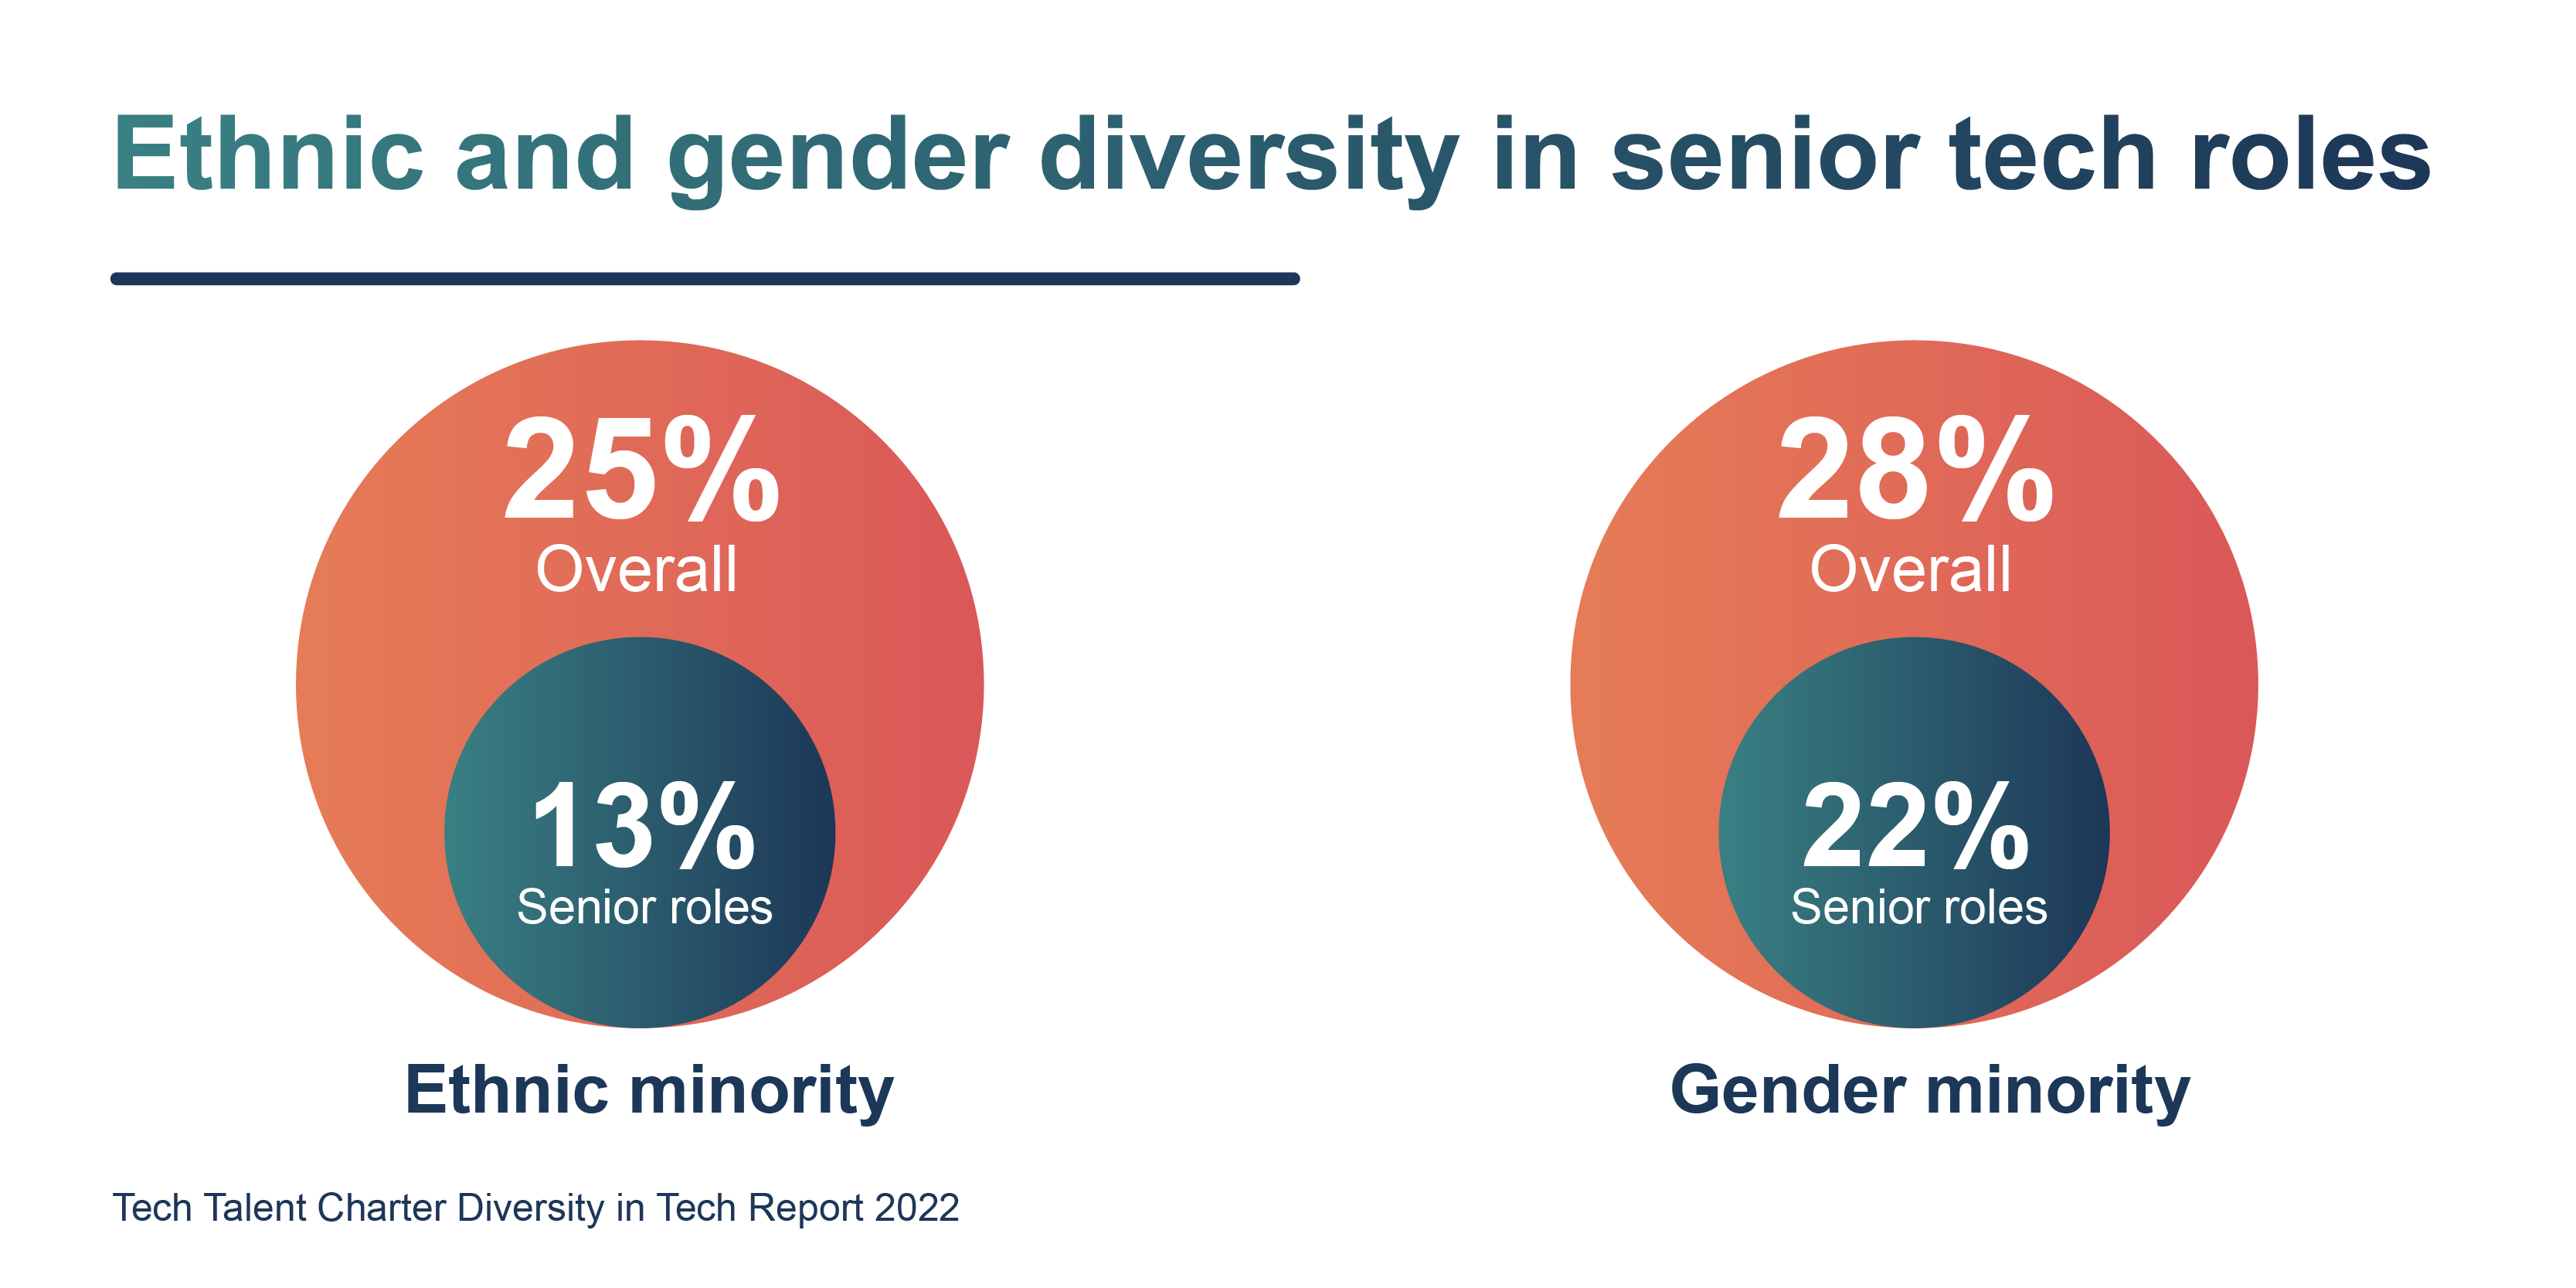 A visual representation of ethnic and gender diversity in senior tech roles